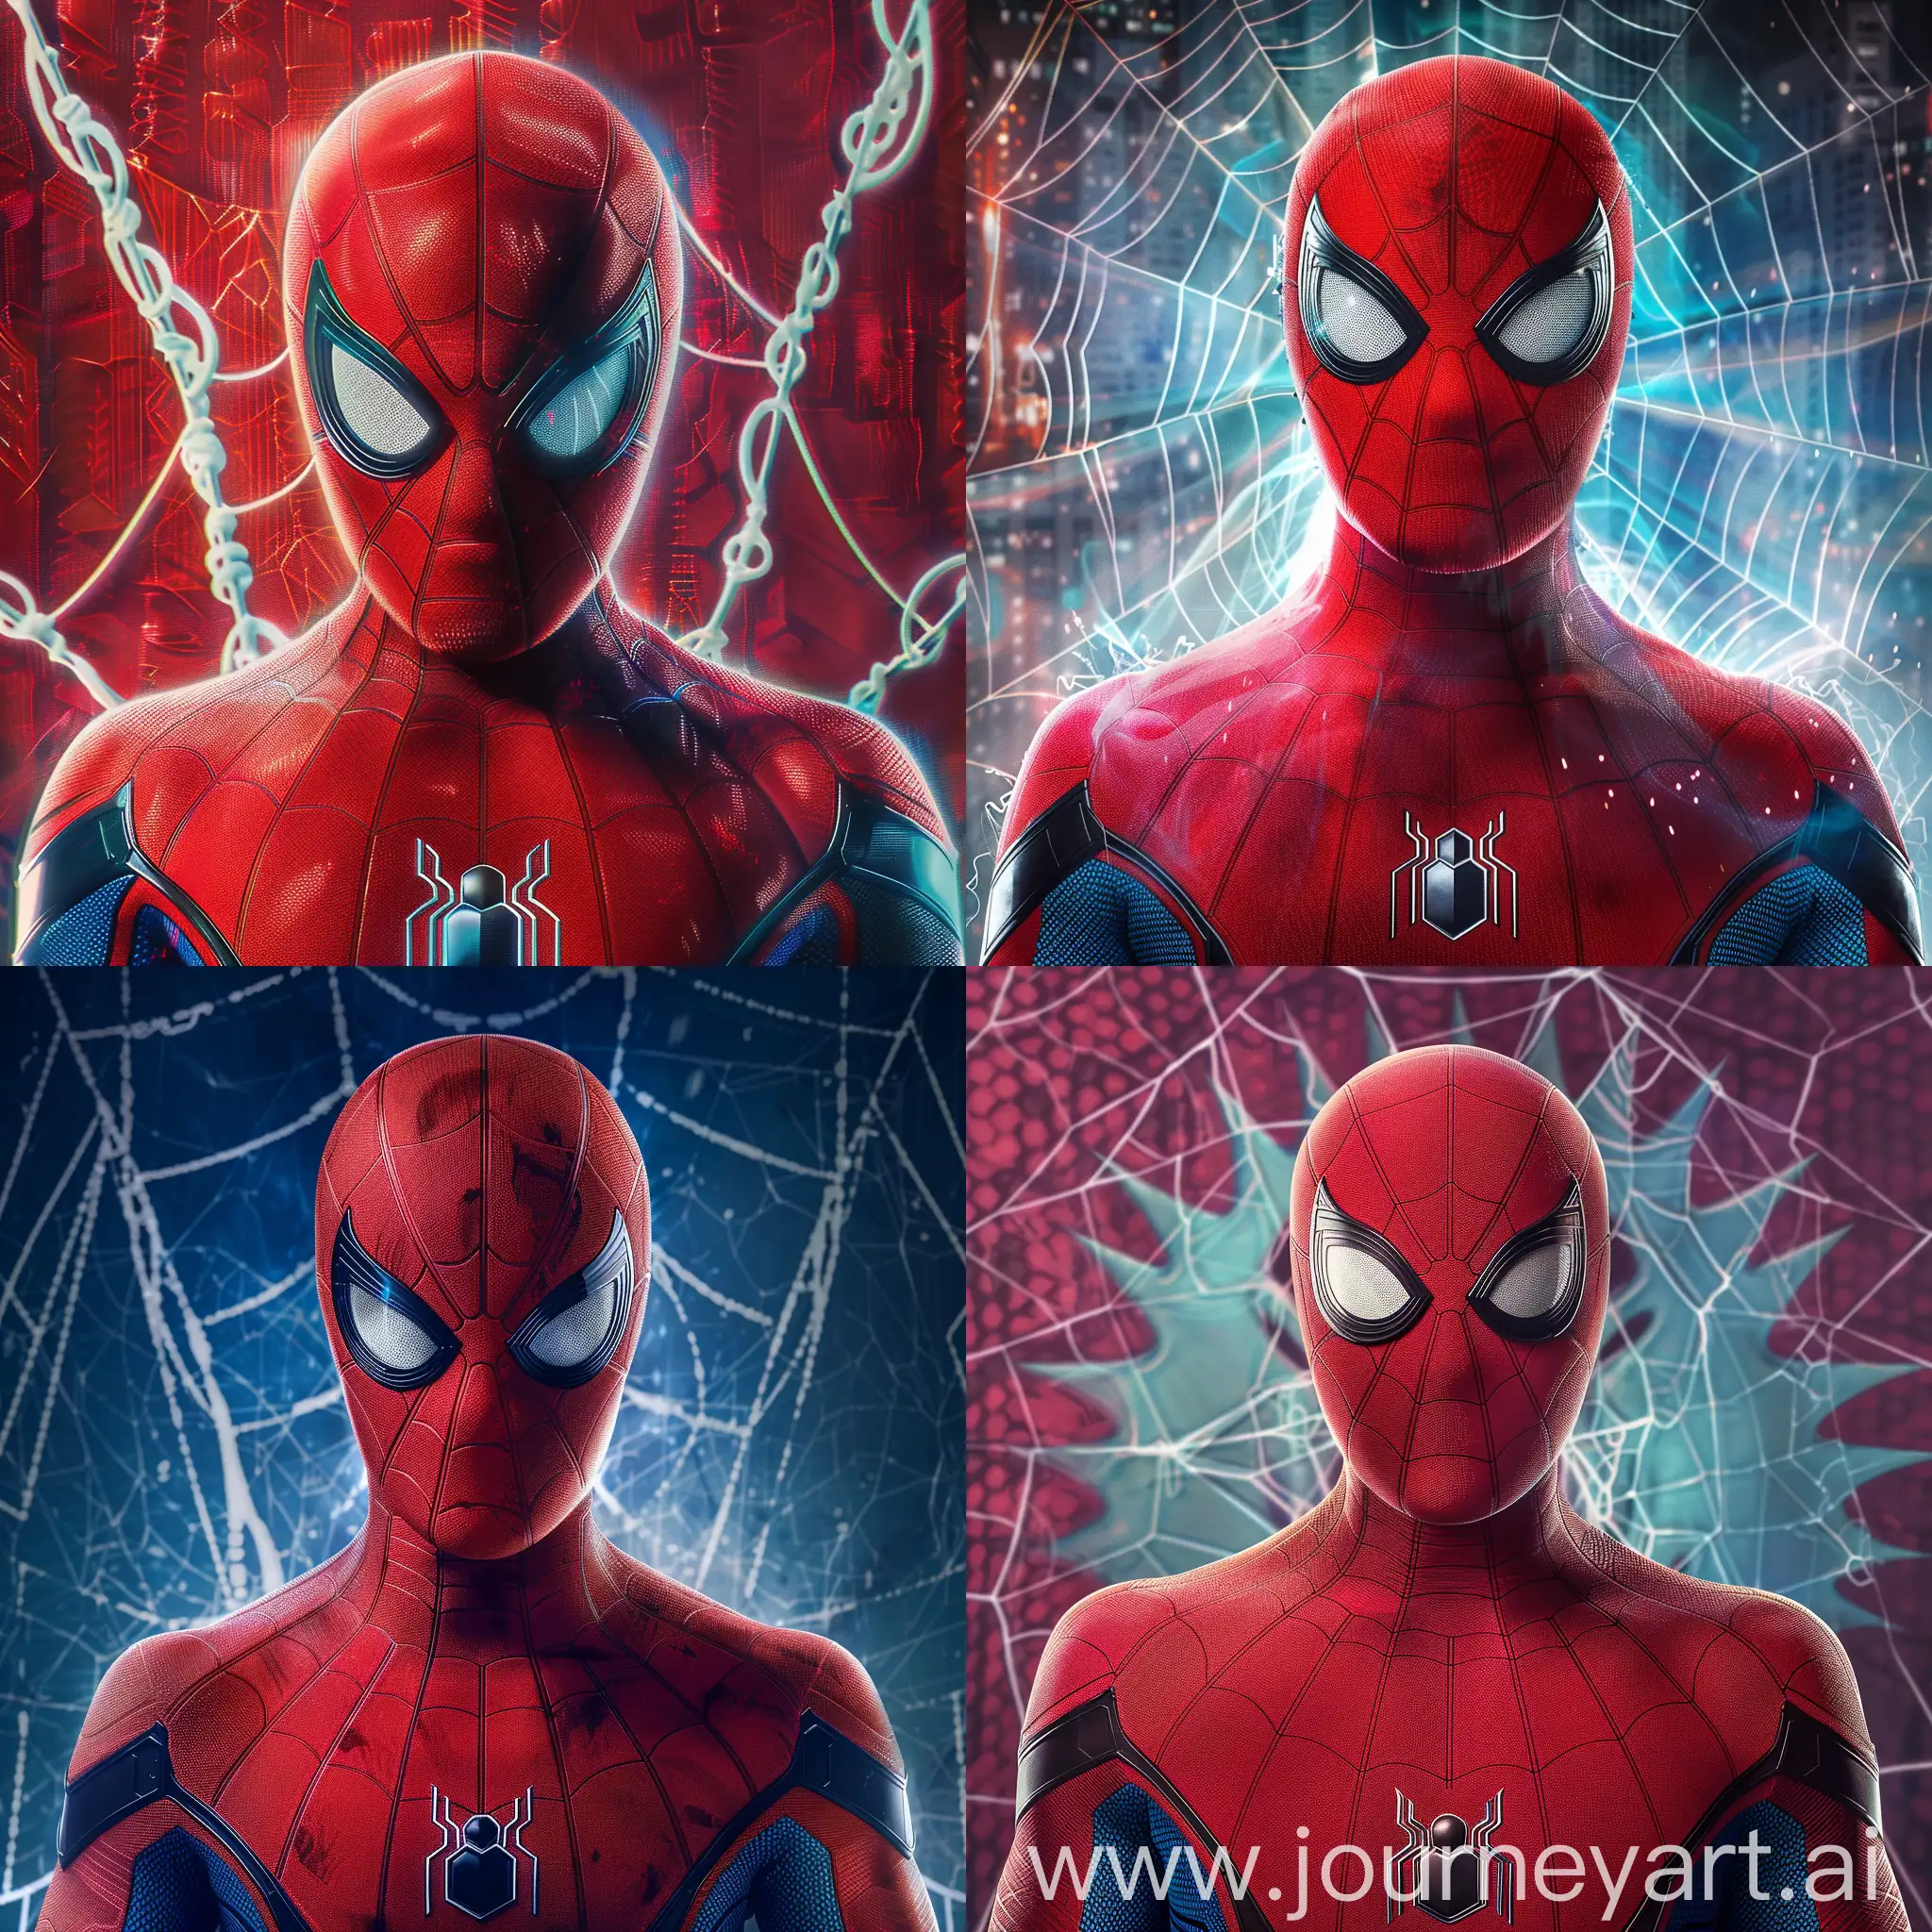 8k Cinematic movie poster , spider-man  advanced red and blue  suit white long spider symbol with MCU Spider-Man mask is a red mask with too small very short mechanical movable eyelenses , web patterns.